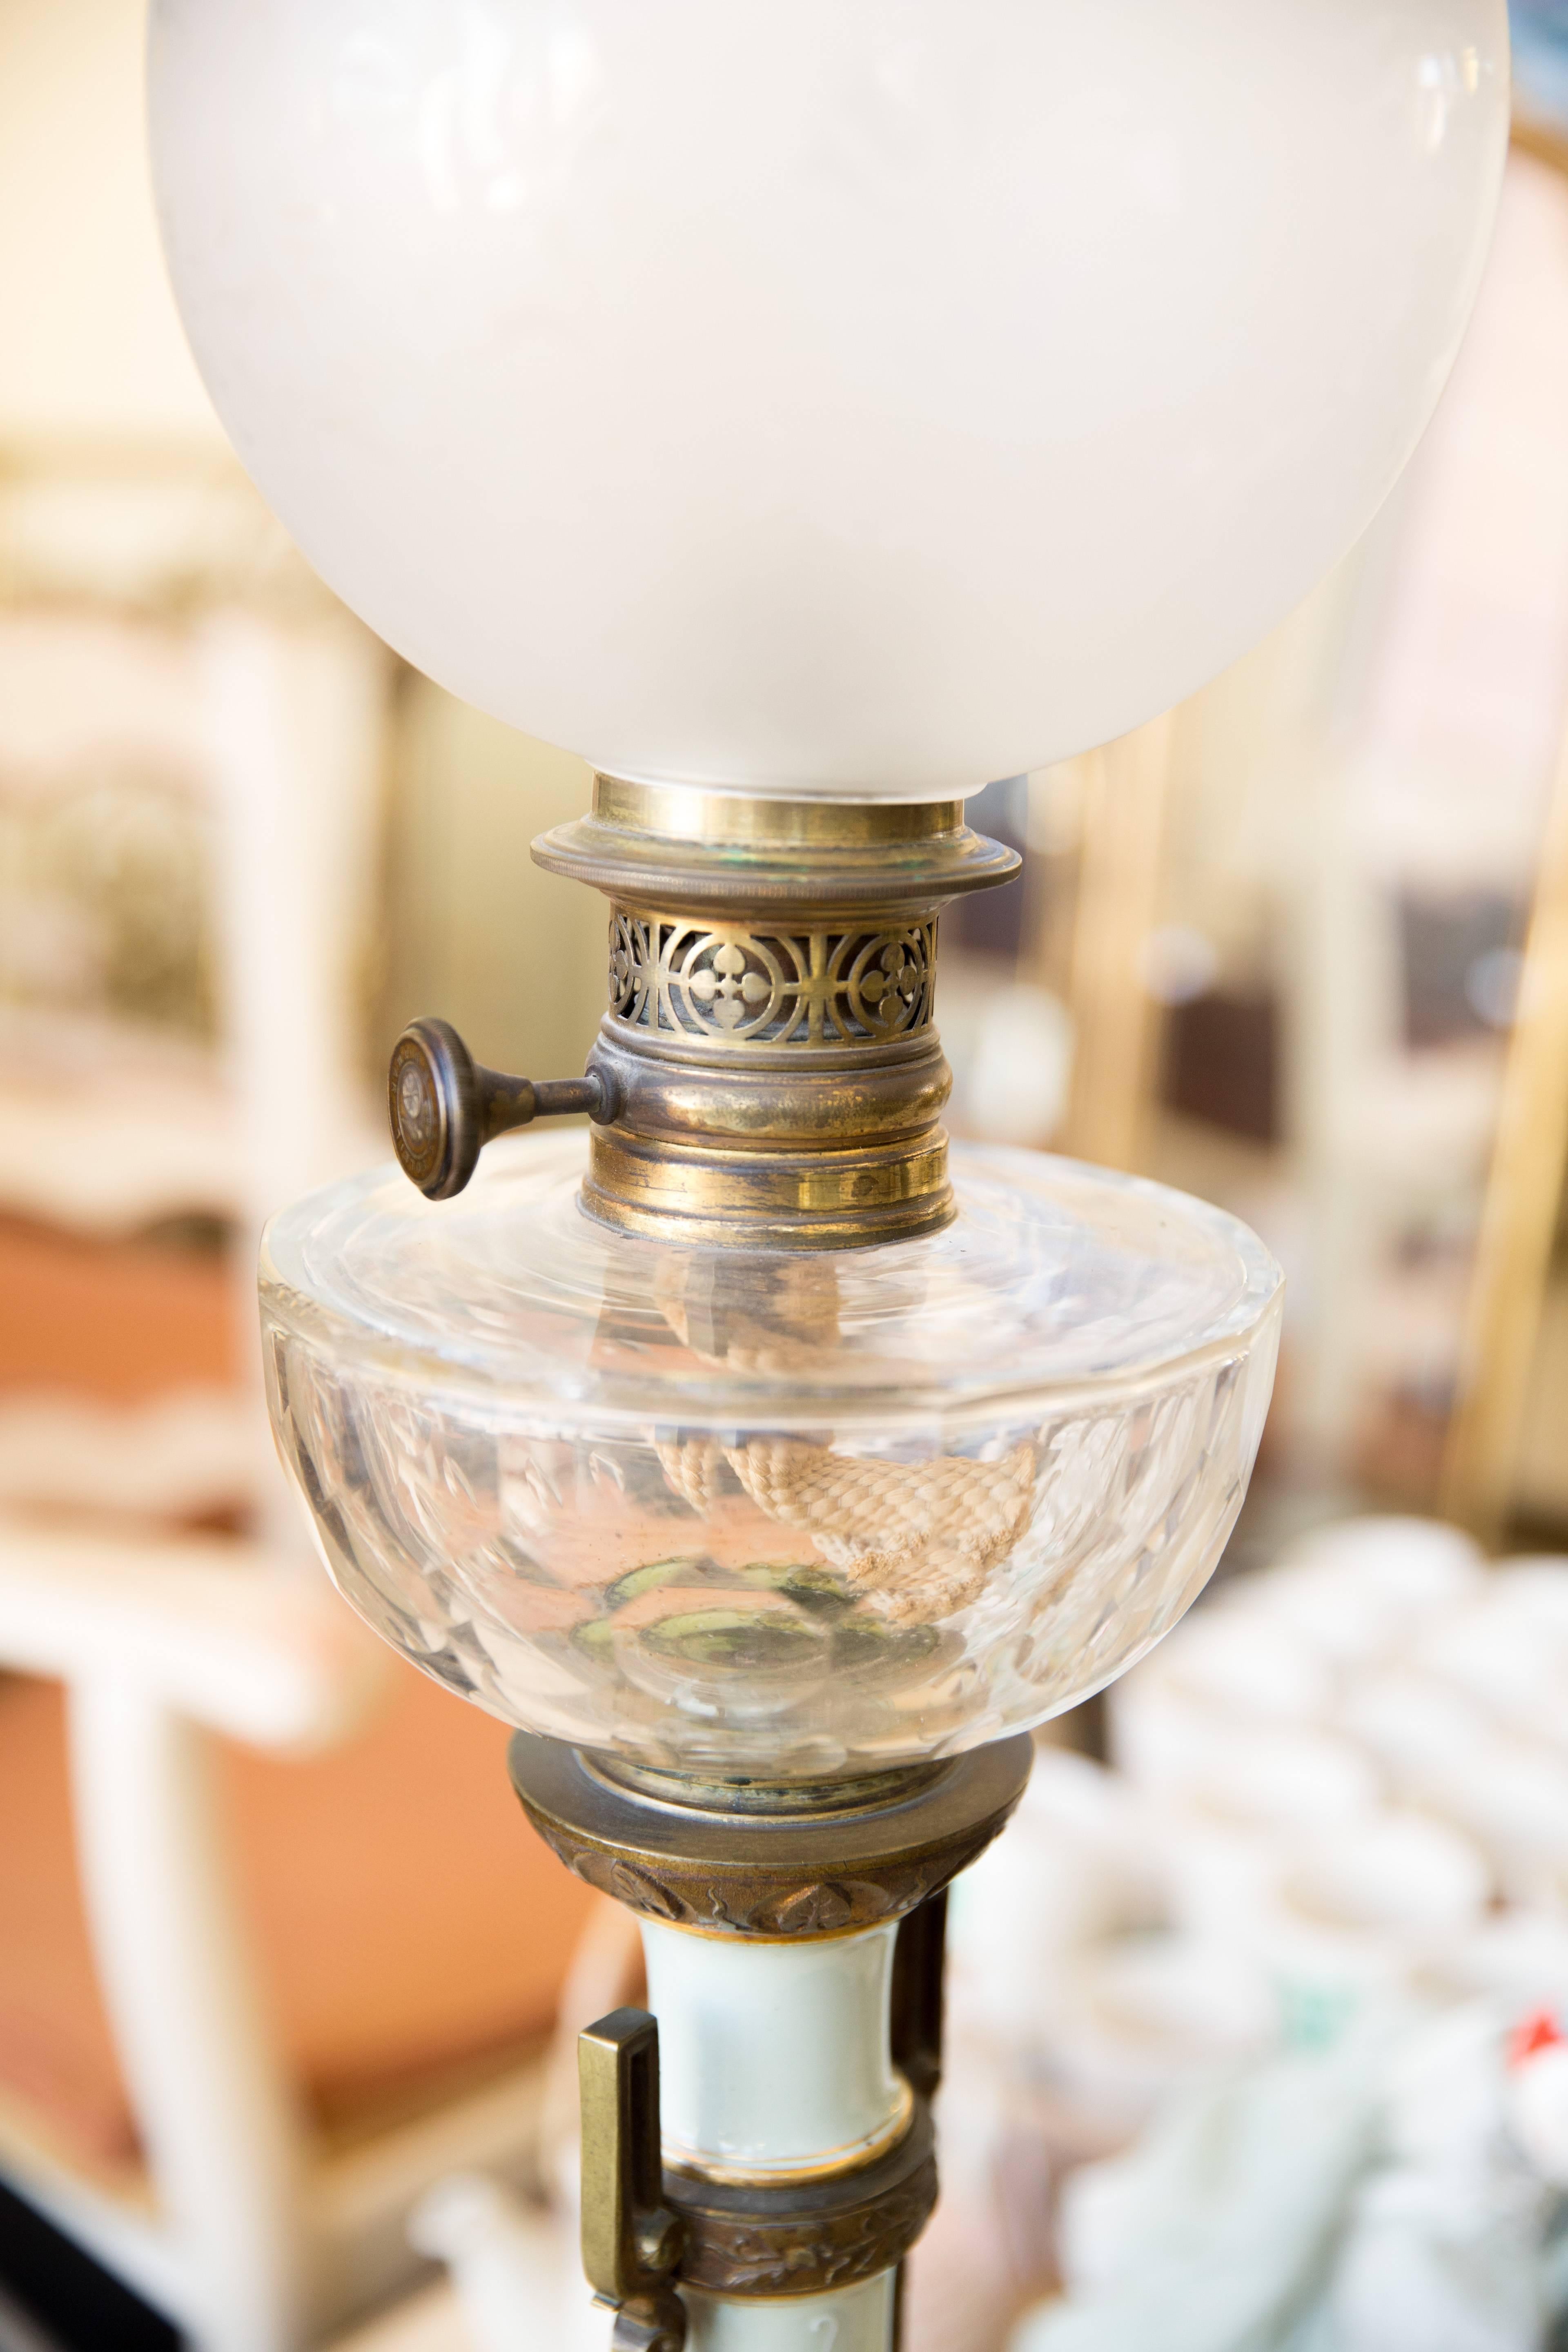 Exceptional Porcelain Lamp with Original Oil Burner, circa 1900 In Excellent Condition For Sale In Sofia, BG